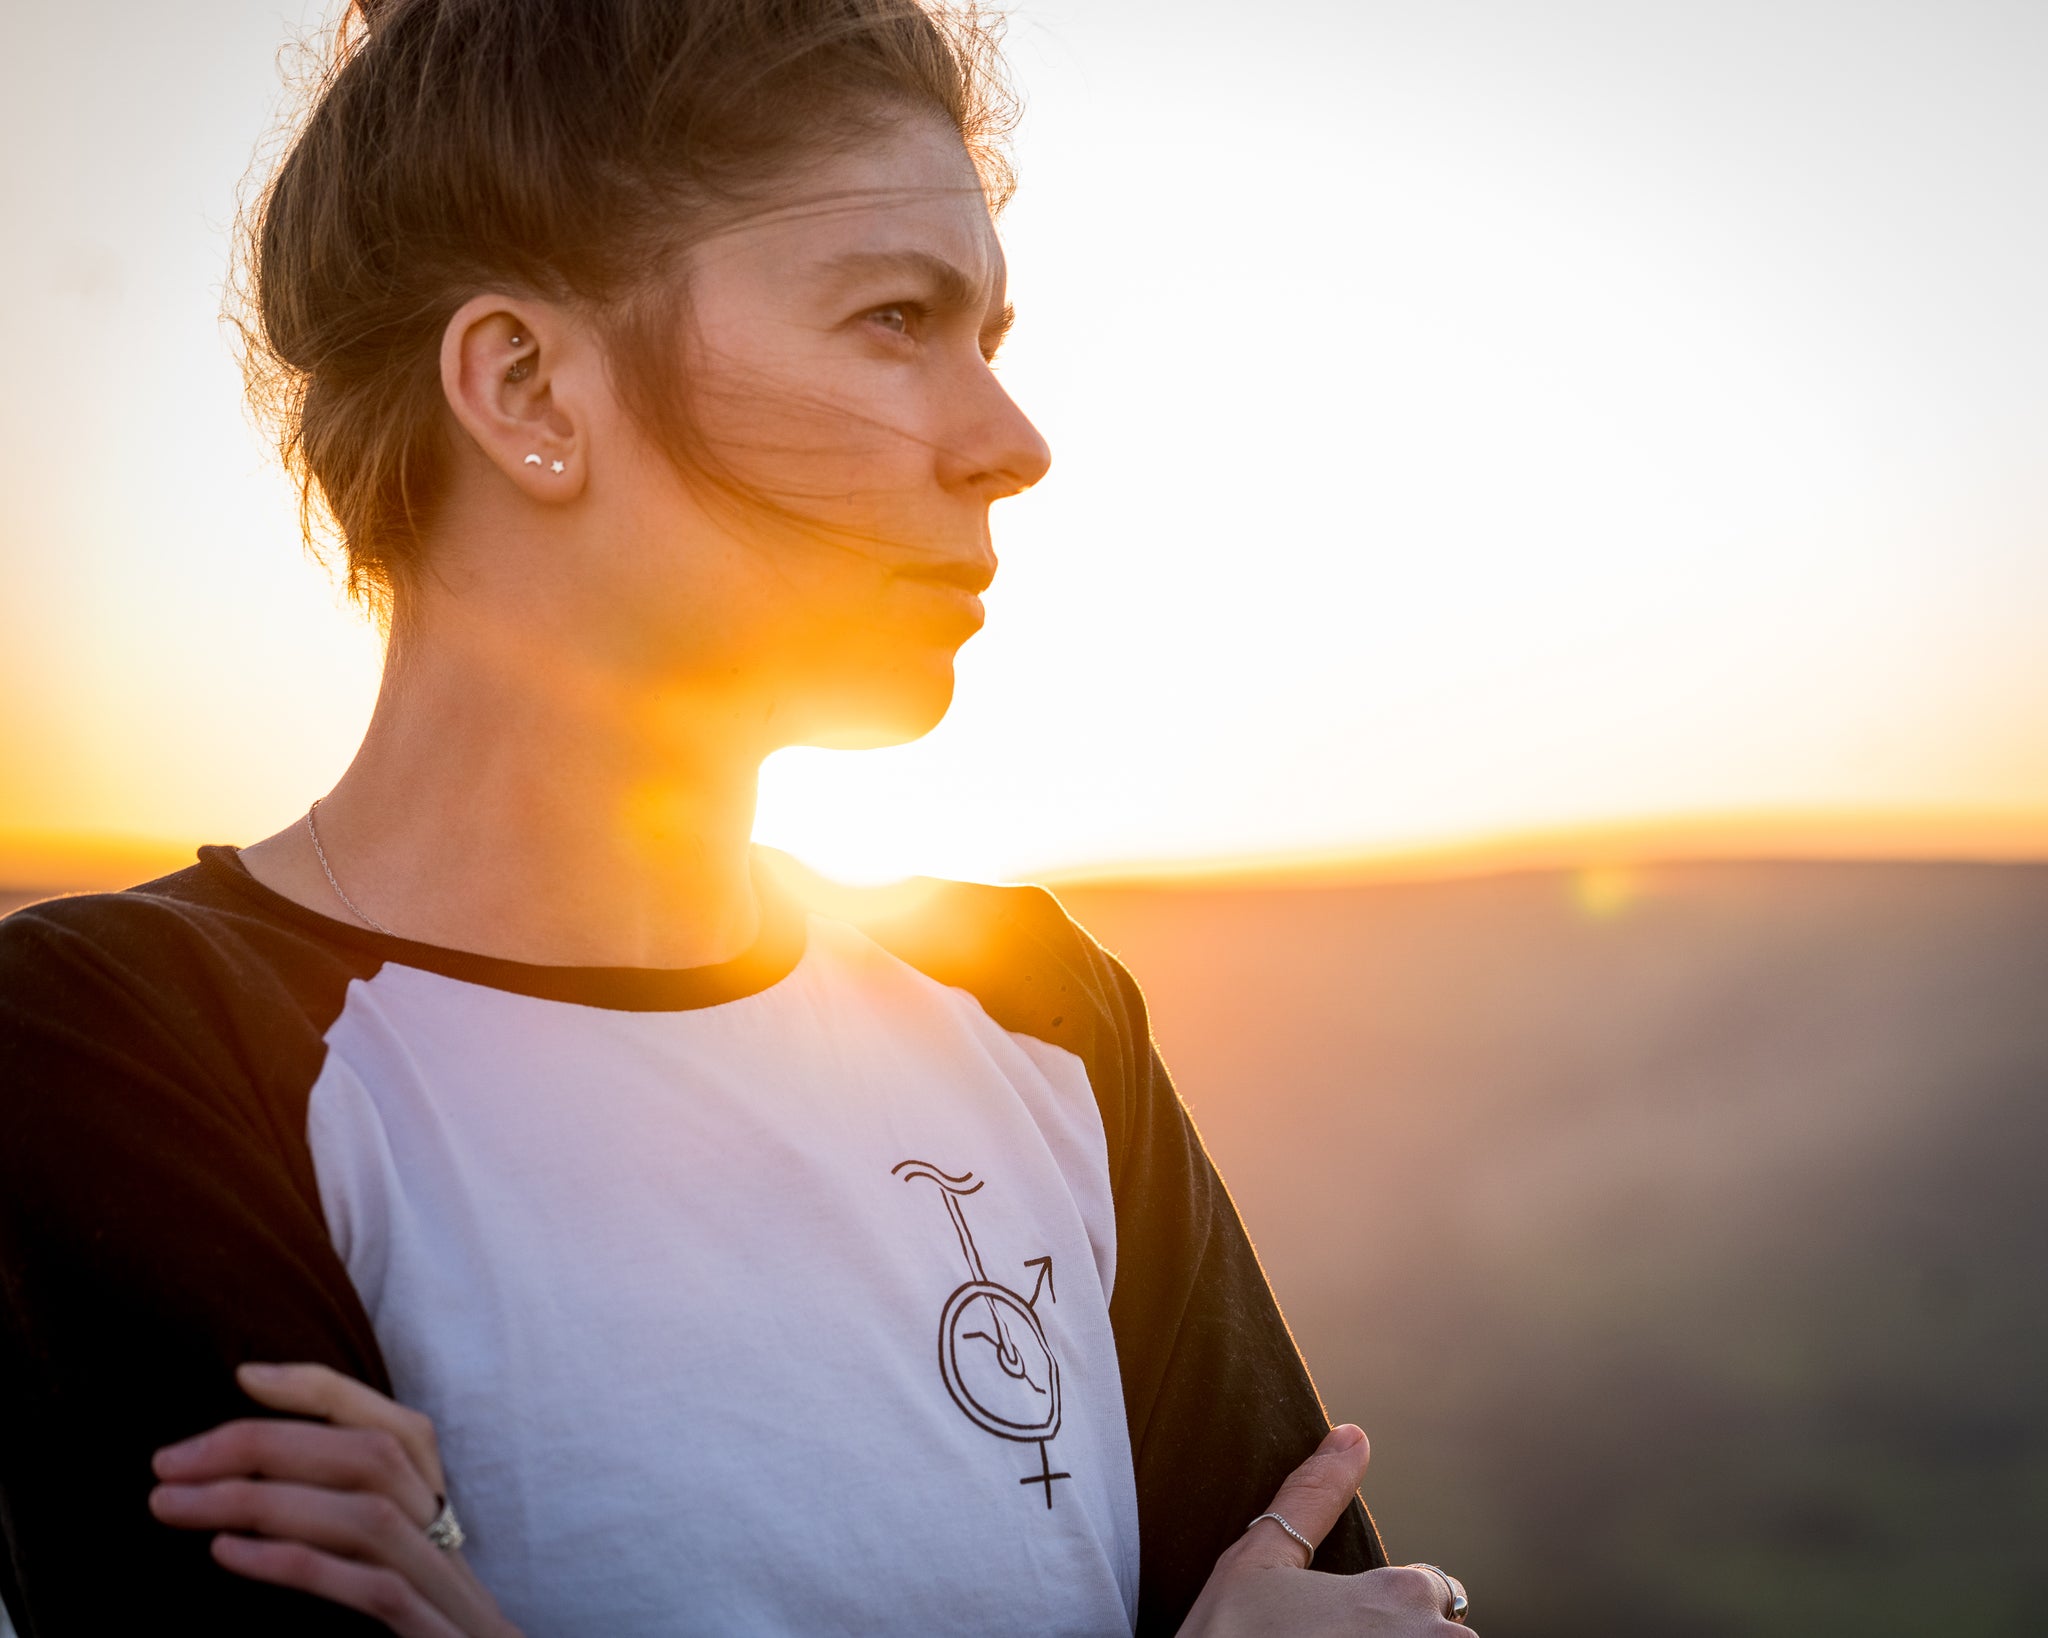 Unicycle baseball t-shirt sunset picture female employee looking powerful into the distance